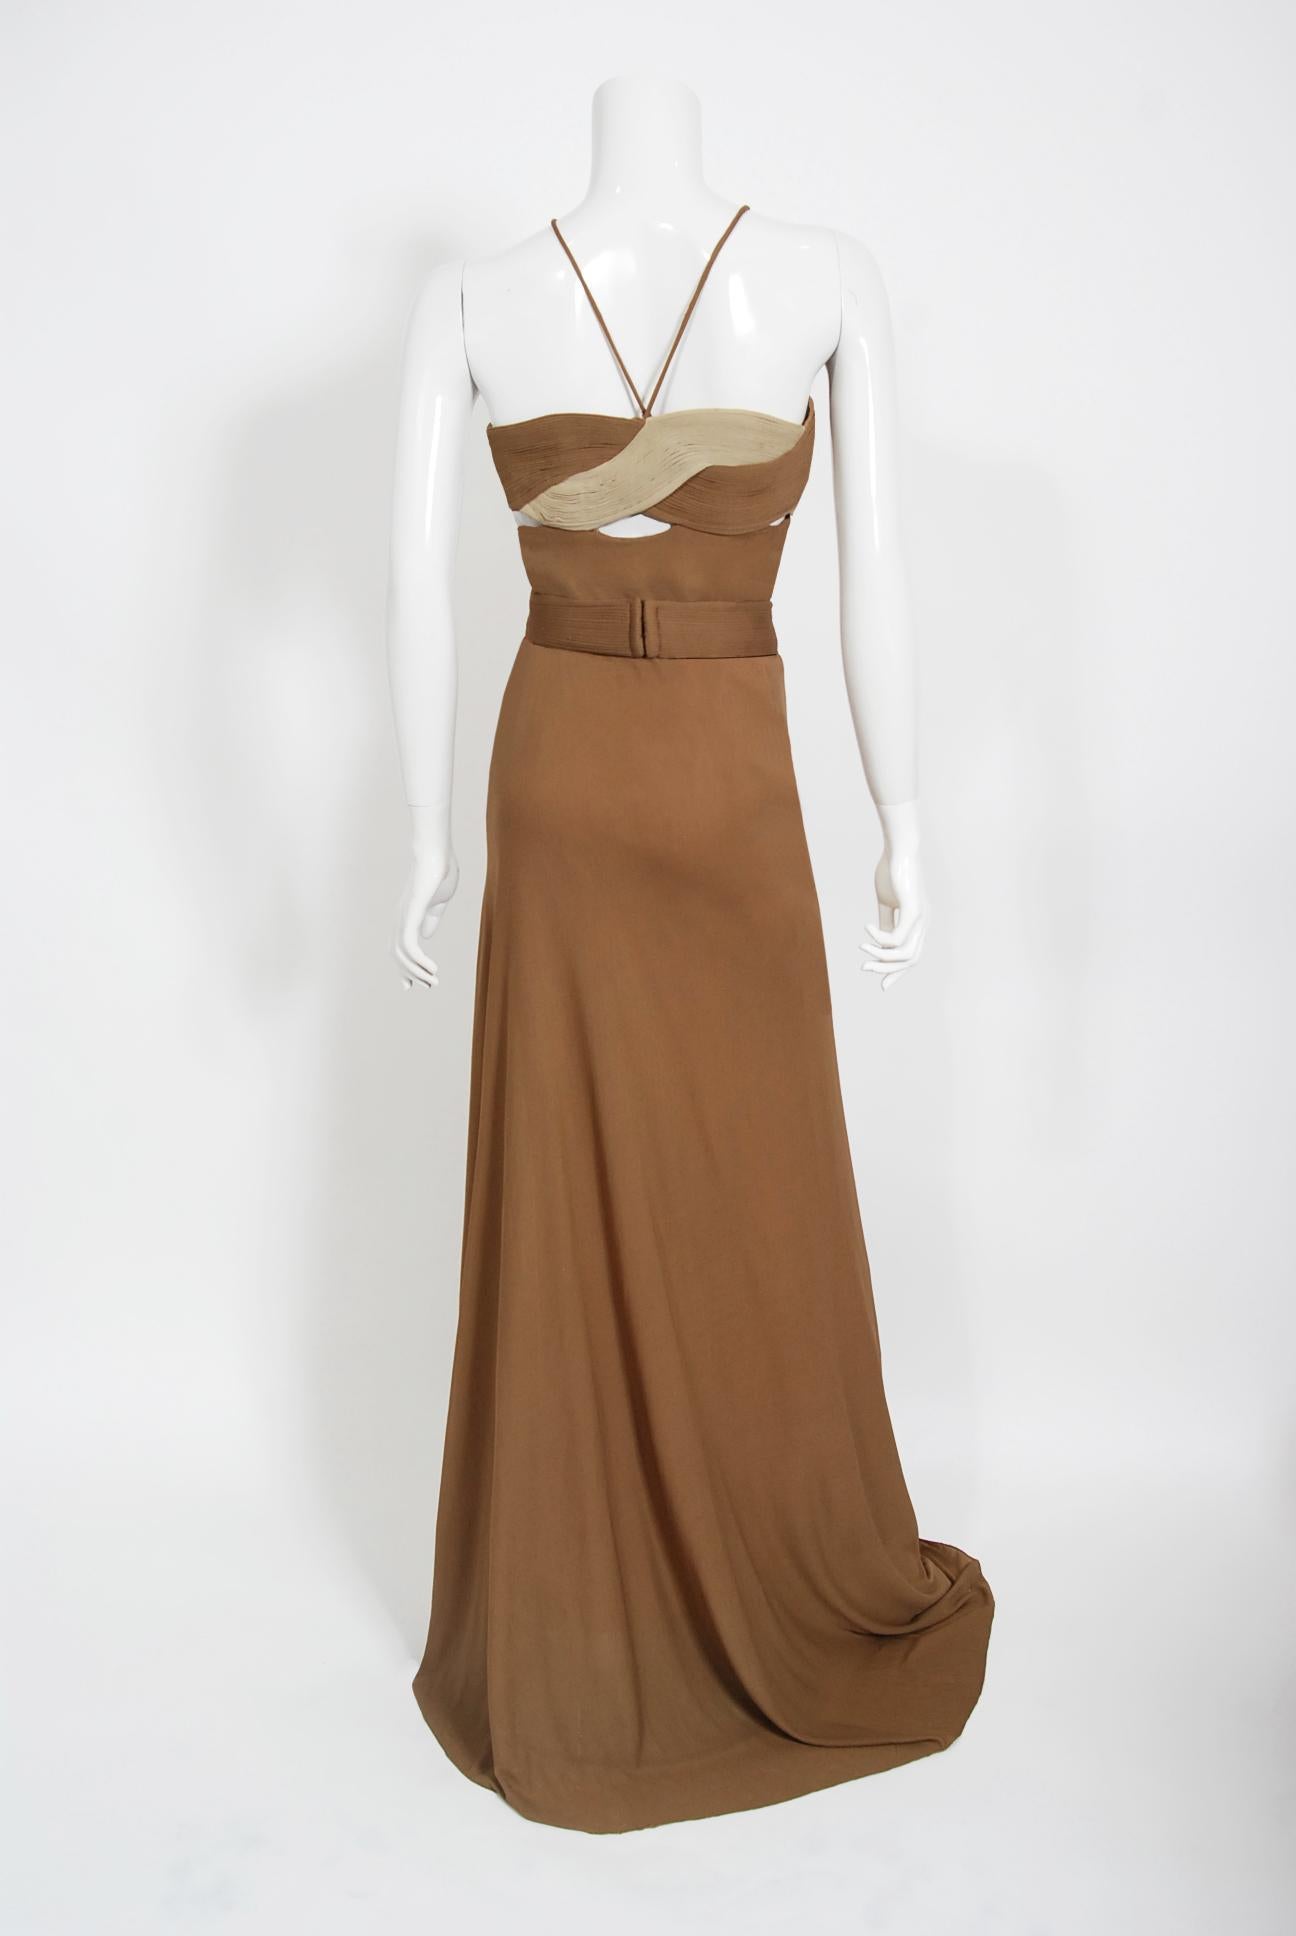 Women's Vintage 1975 Madame Grès Haute Couture Rare Documented Silk-Jersey Cut Out Gown